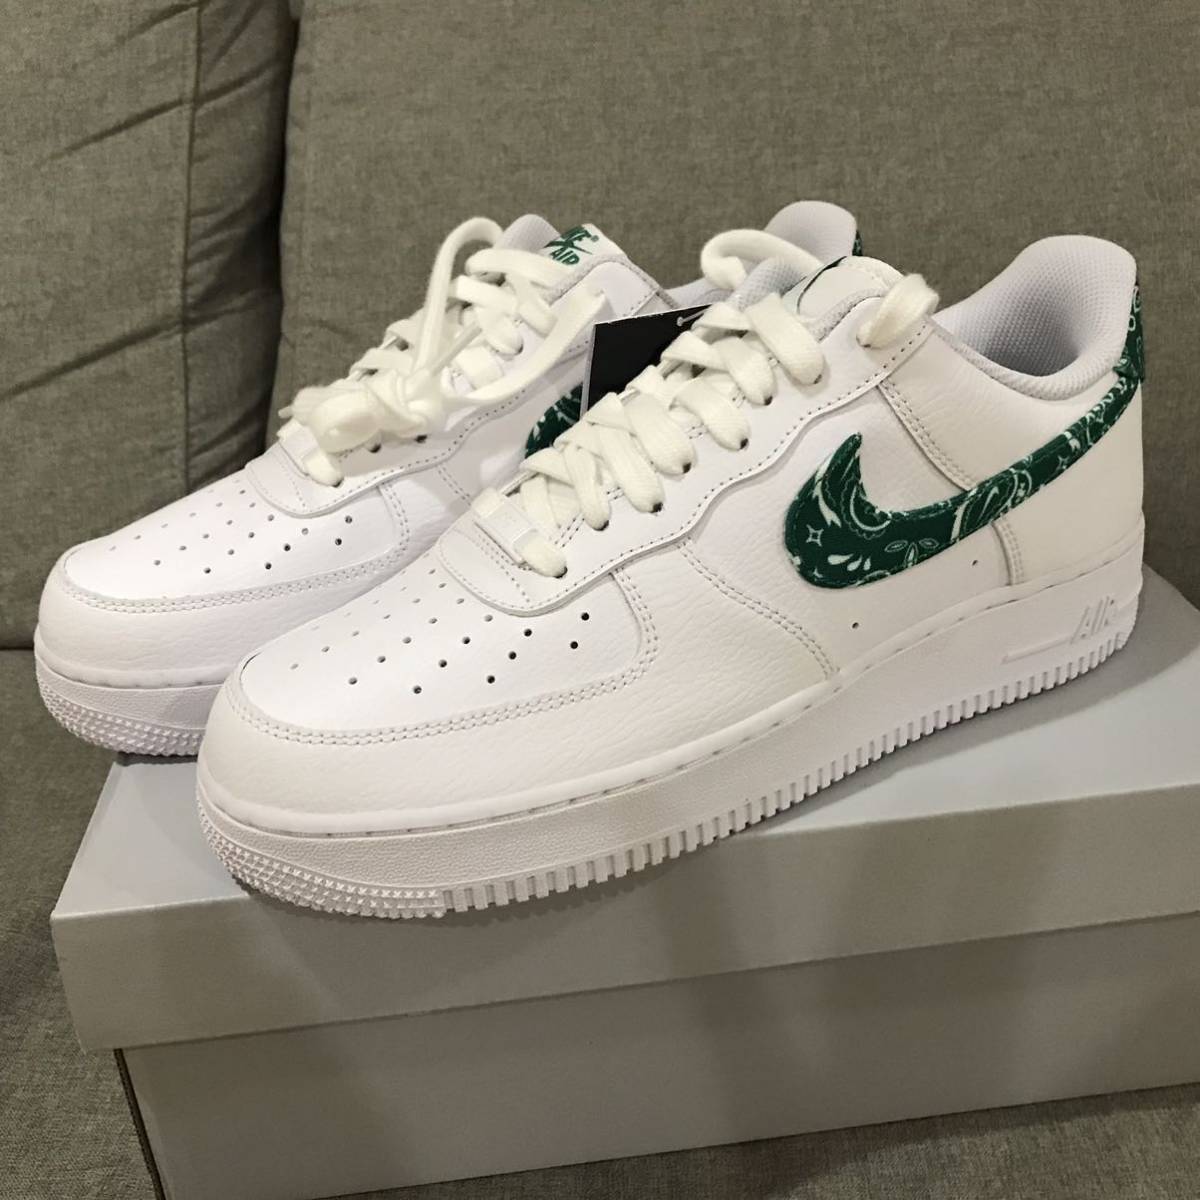 Nike WMNS Air Force 1 Low '07 Essential Paisley Green サイズ:28.0 